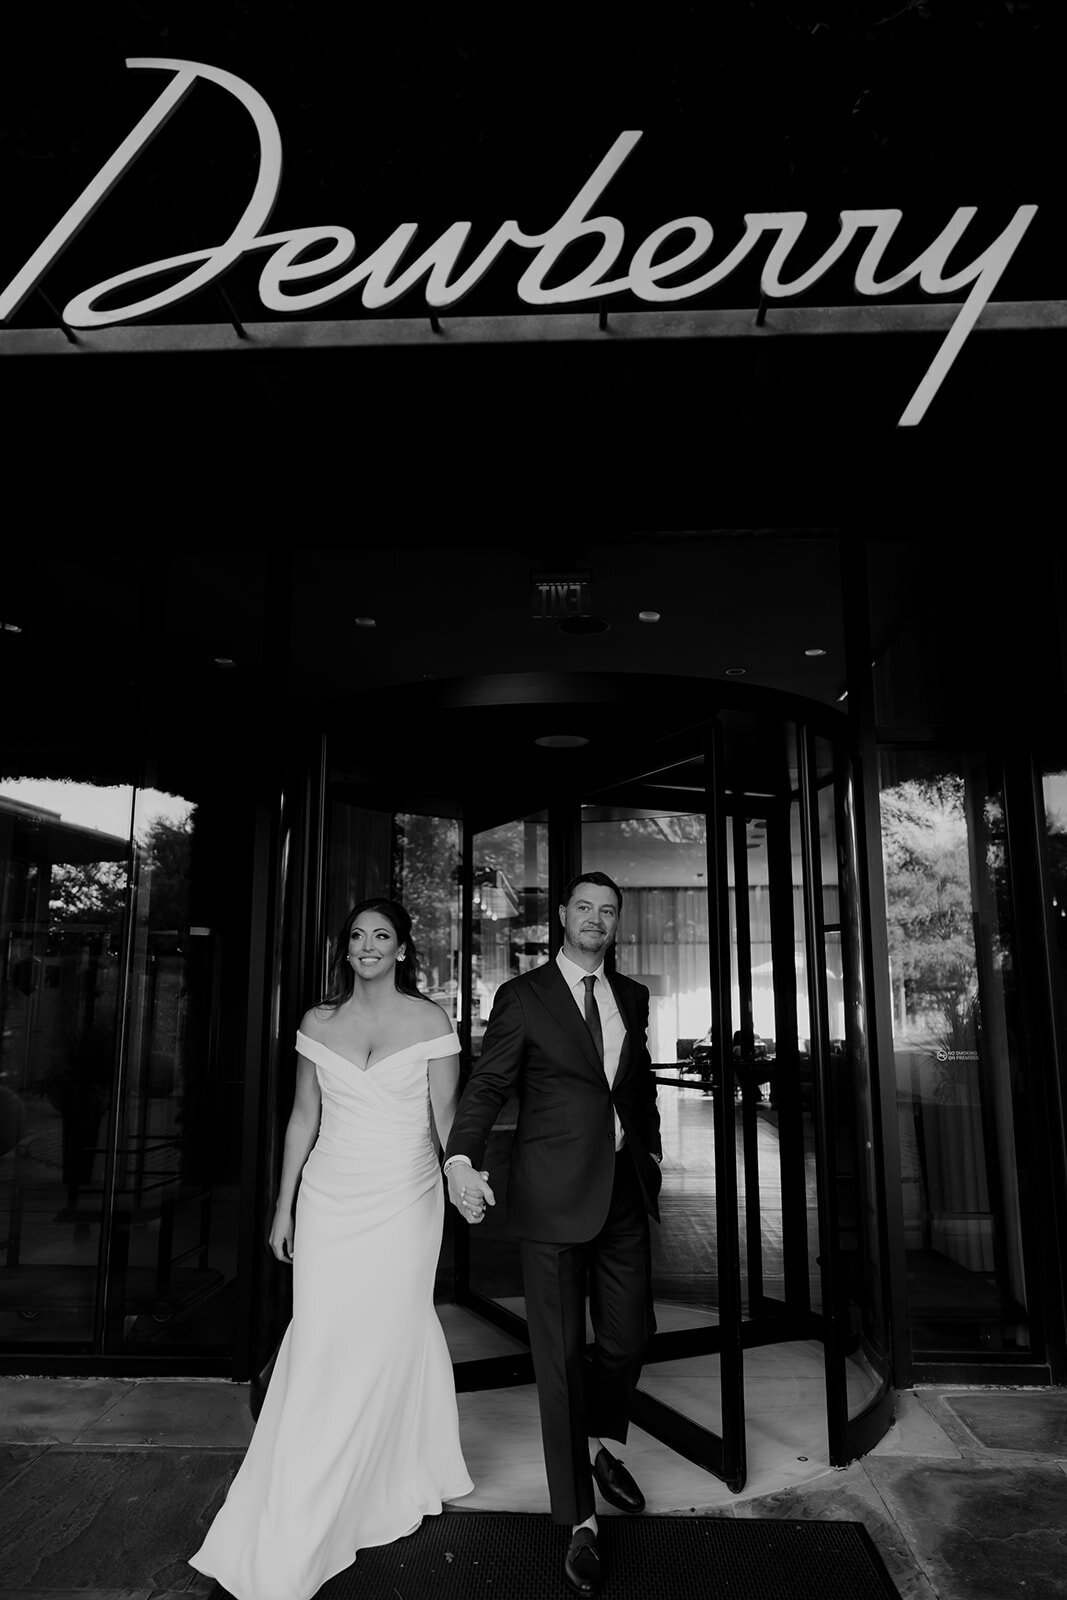 Couple walking out of revolving door at the dewberry